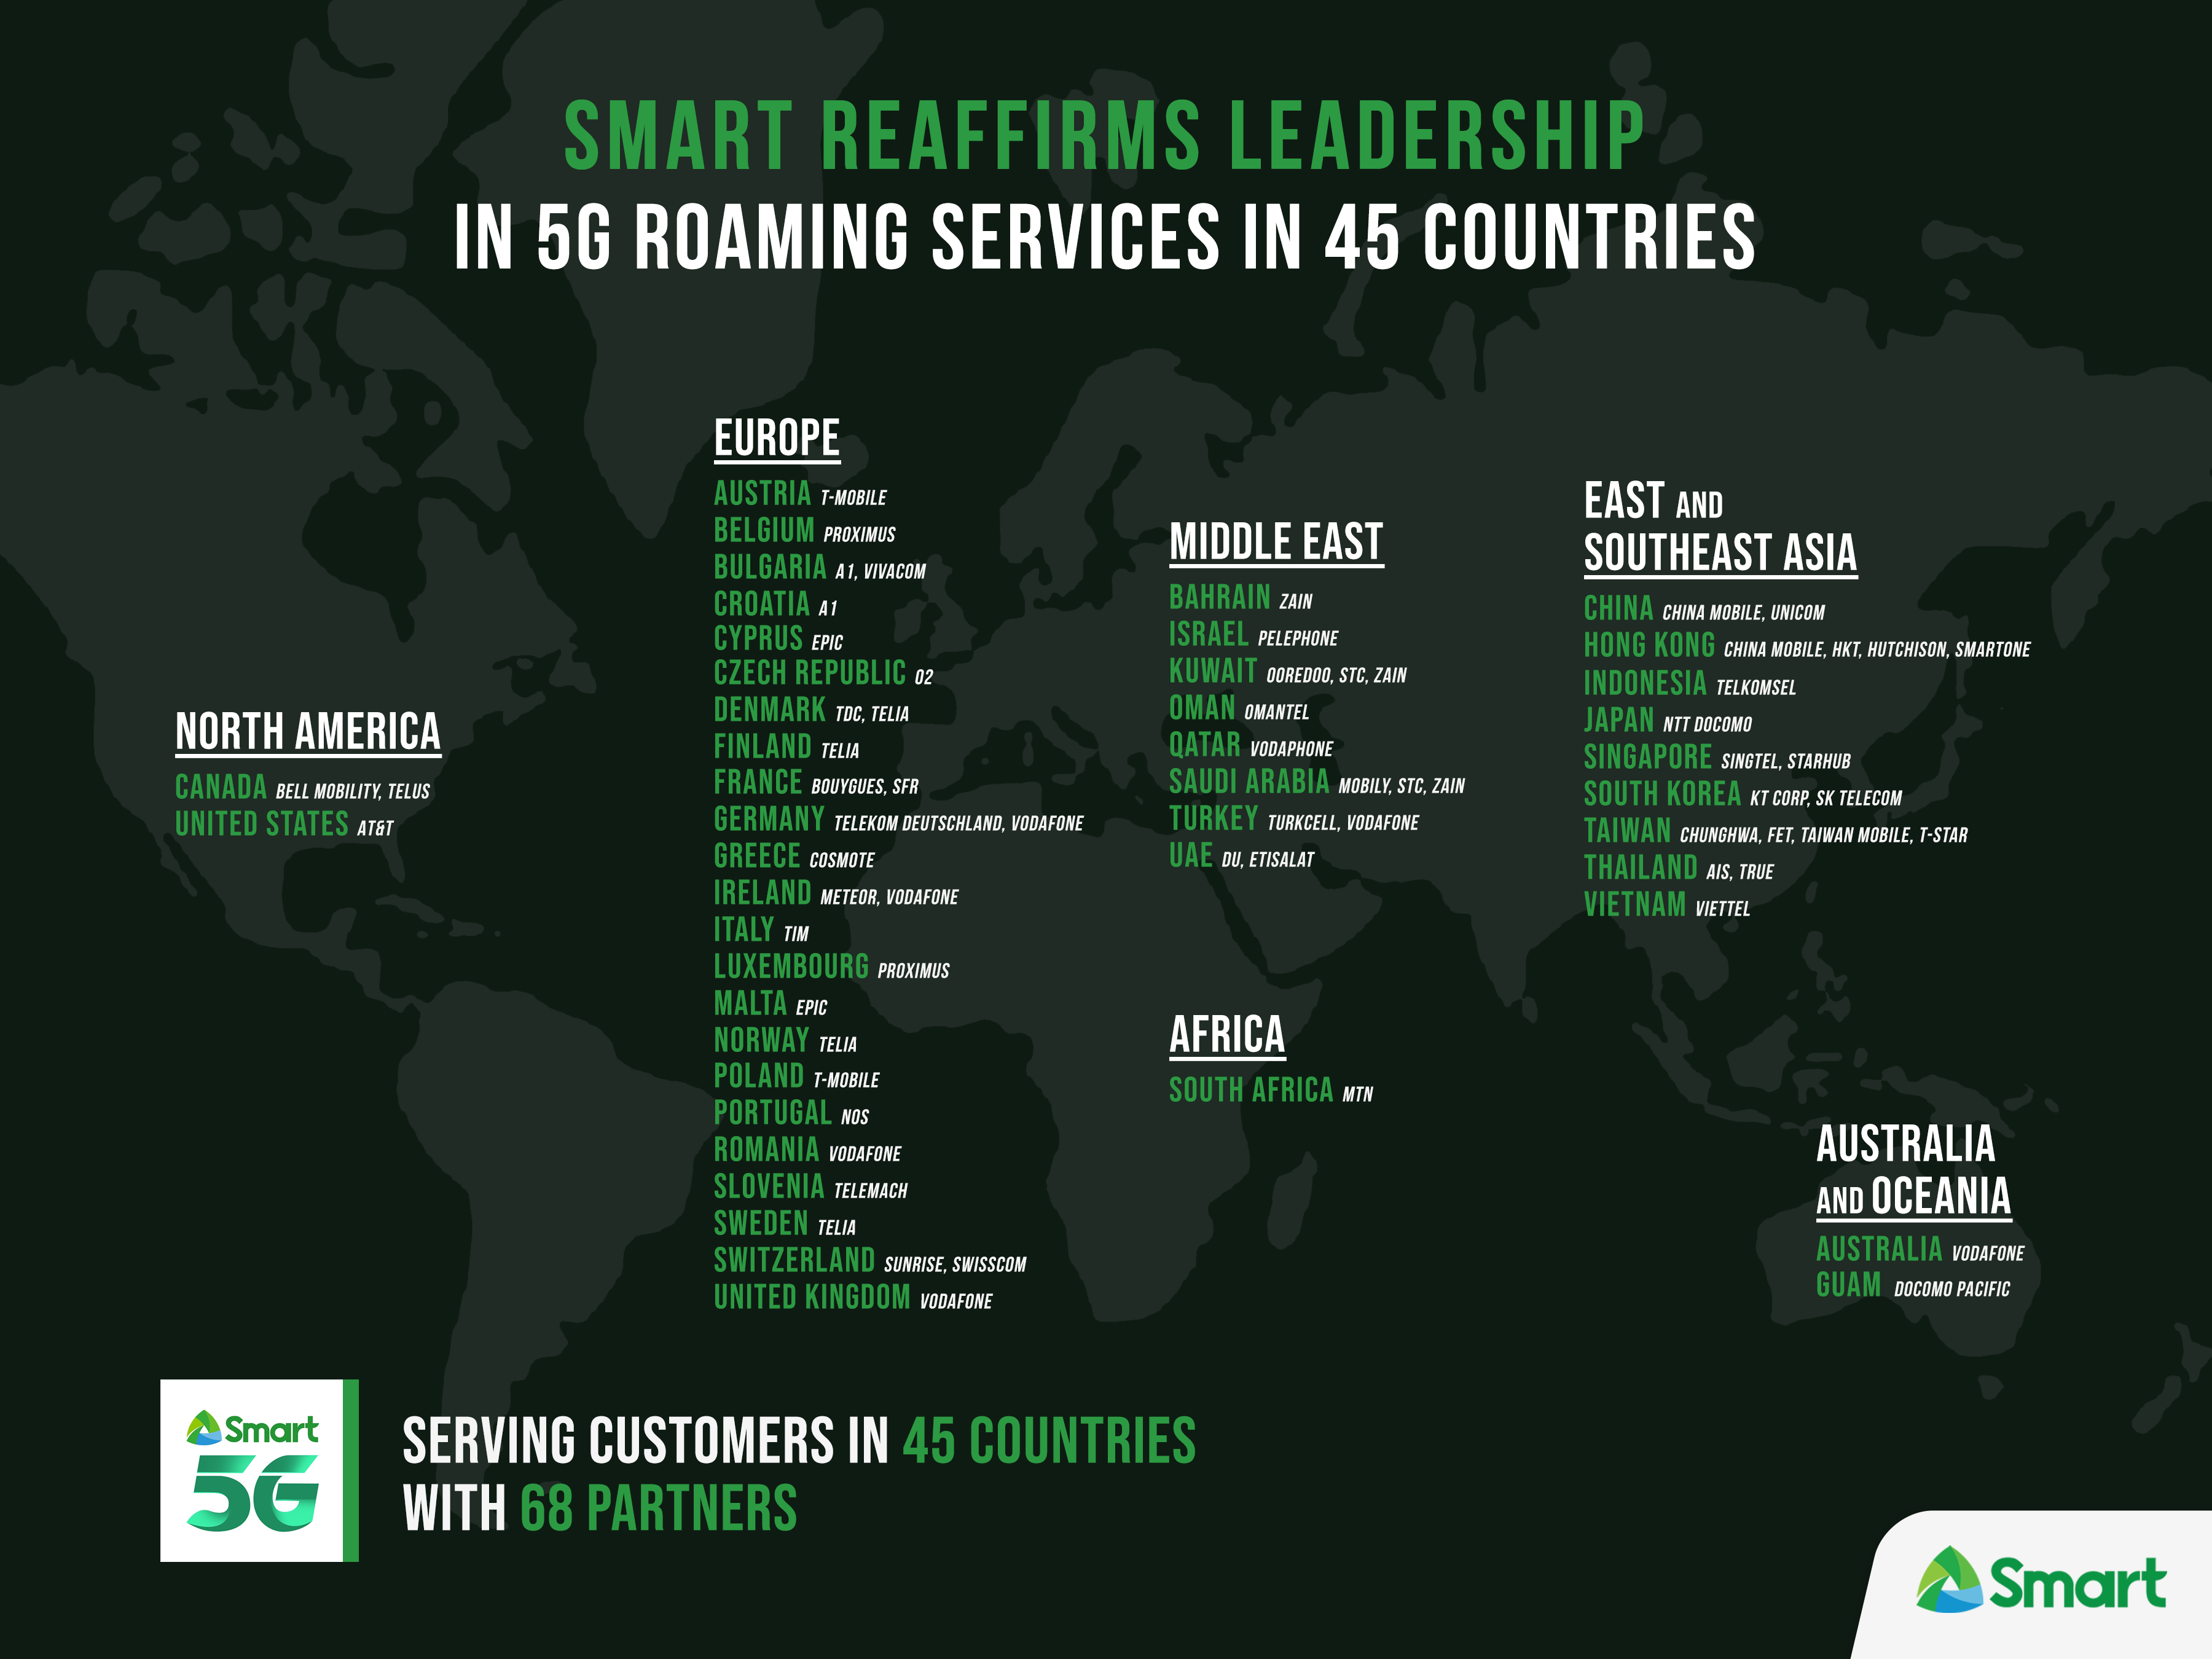 Smart reaffirms leadership in 5G roaming, offers services in 45 countries